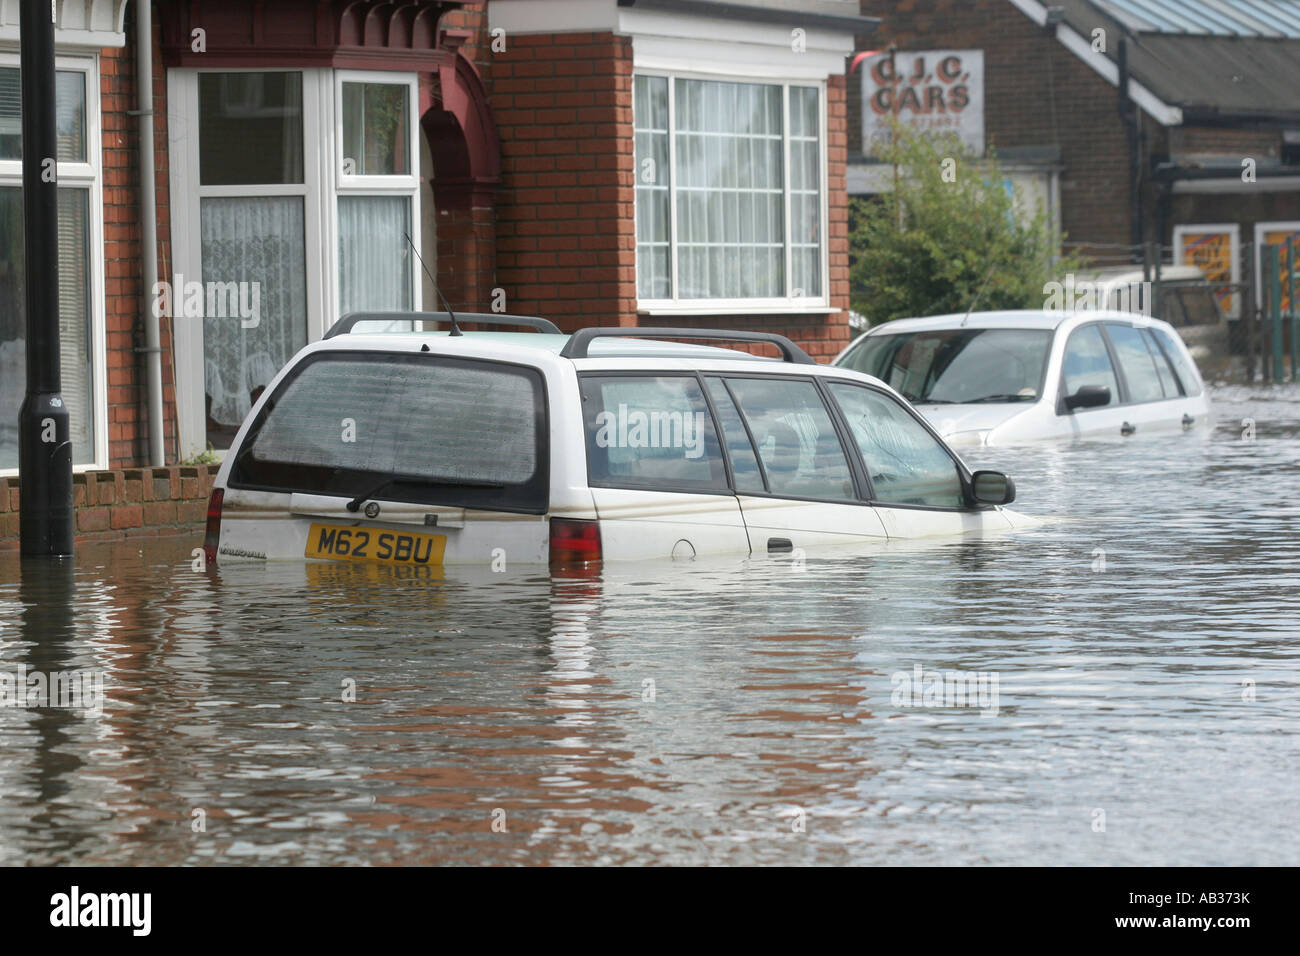 flooding in Toll Bar, South Yorkshire, UK. Stock Photo